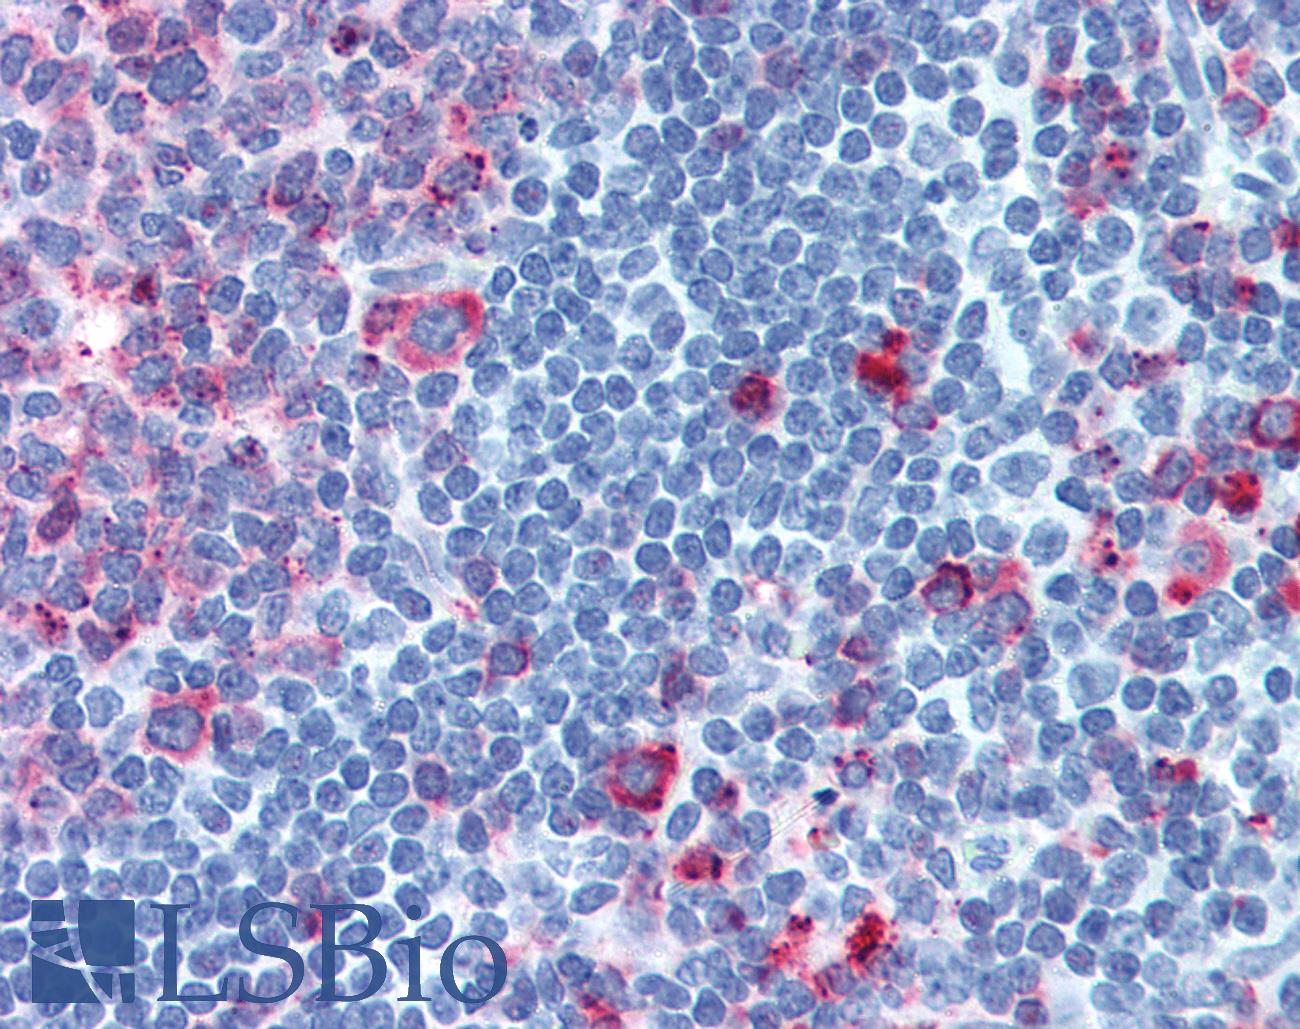 CELSR1 Antibody - Anti-CELSR1 antibody IHC of human tonsil. Immunohistochemistry of formalin-fixed, paraffin-embedded tissue after heat-induced antigen retrieval. Antibody concentration 8.4 ug/ml.